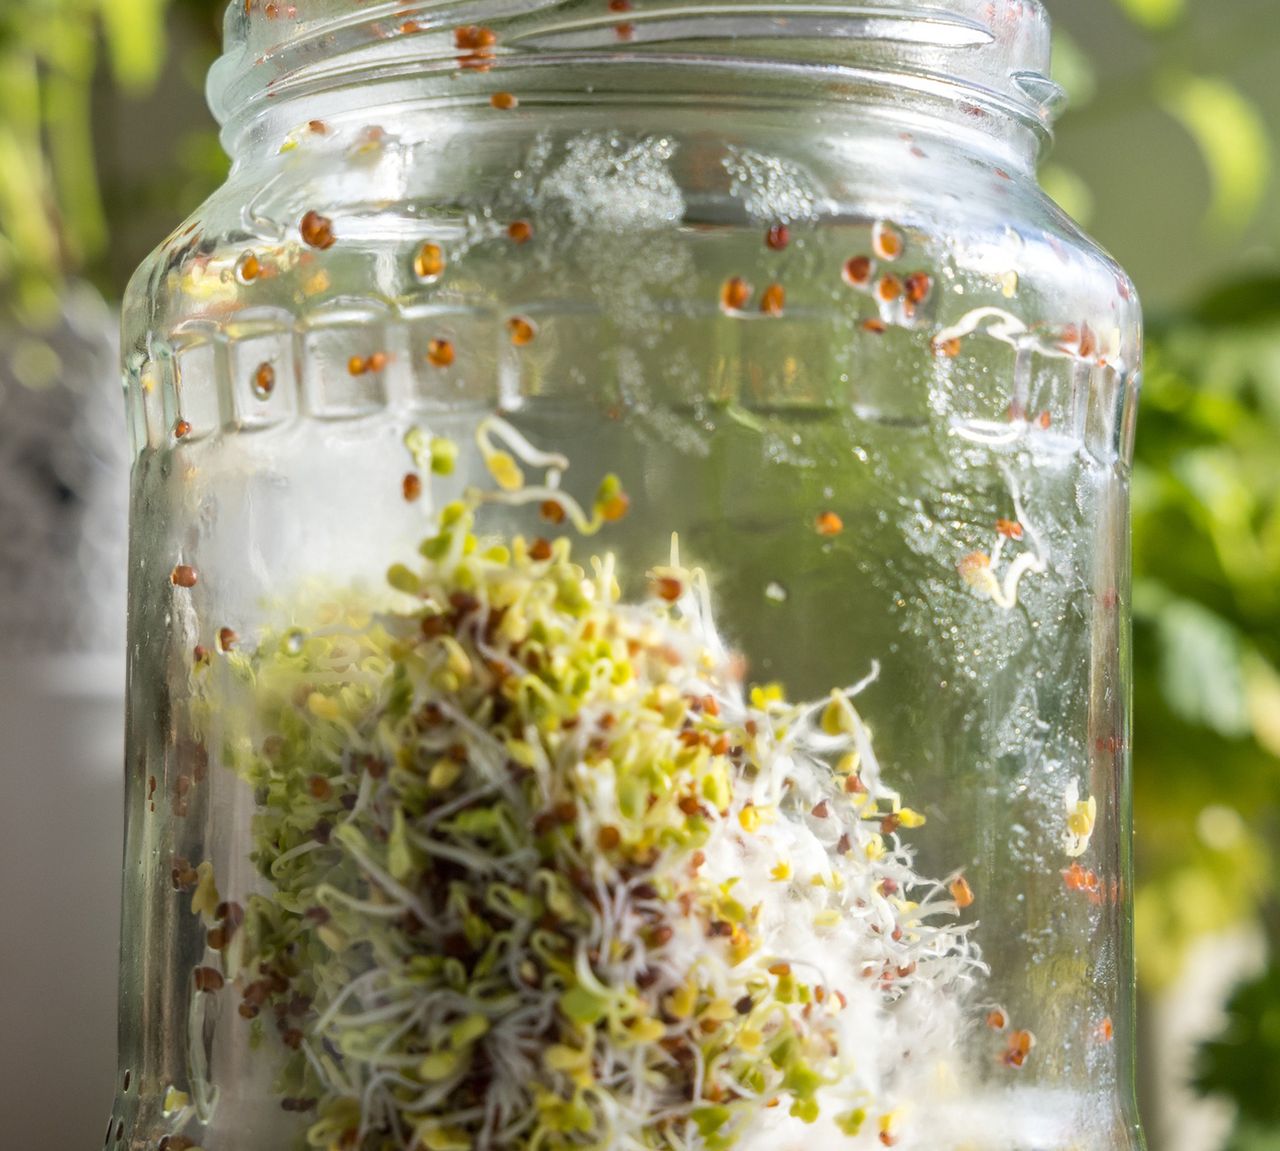 Broccoli sprouts have incredible properties.